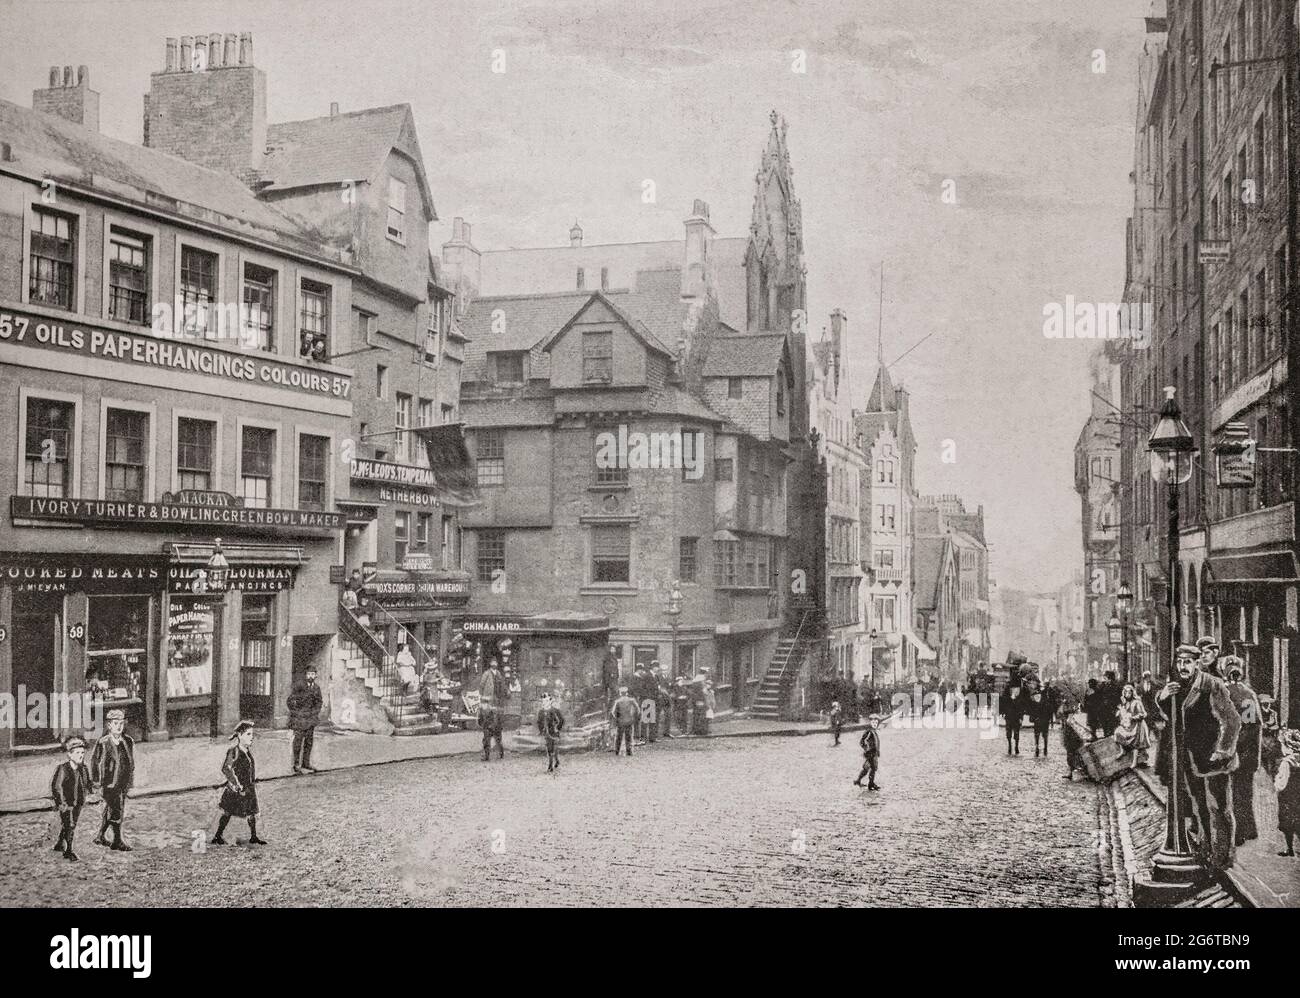 A late 19th century view of High Street in Edinburgh, Scotland, and John Knox's House,reputed to have been owned and lived in by Protestant reformer during the 16th century. Although the house 'was Knox's home only for a few months during the siege of Edinburgh Castle, it is believed that he died here.' It appears to have become widely accepted as 'John Knox's House' from the mid-19th century onwards after Victorian writers like Robert Chambers and Sir Daniel Wilson had repeated the popular tradition of attaching Knox's name to it. Stock Photo